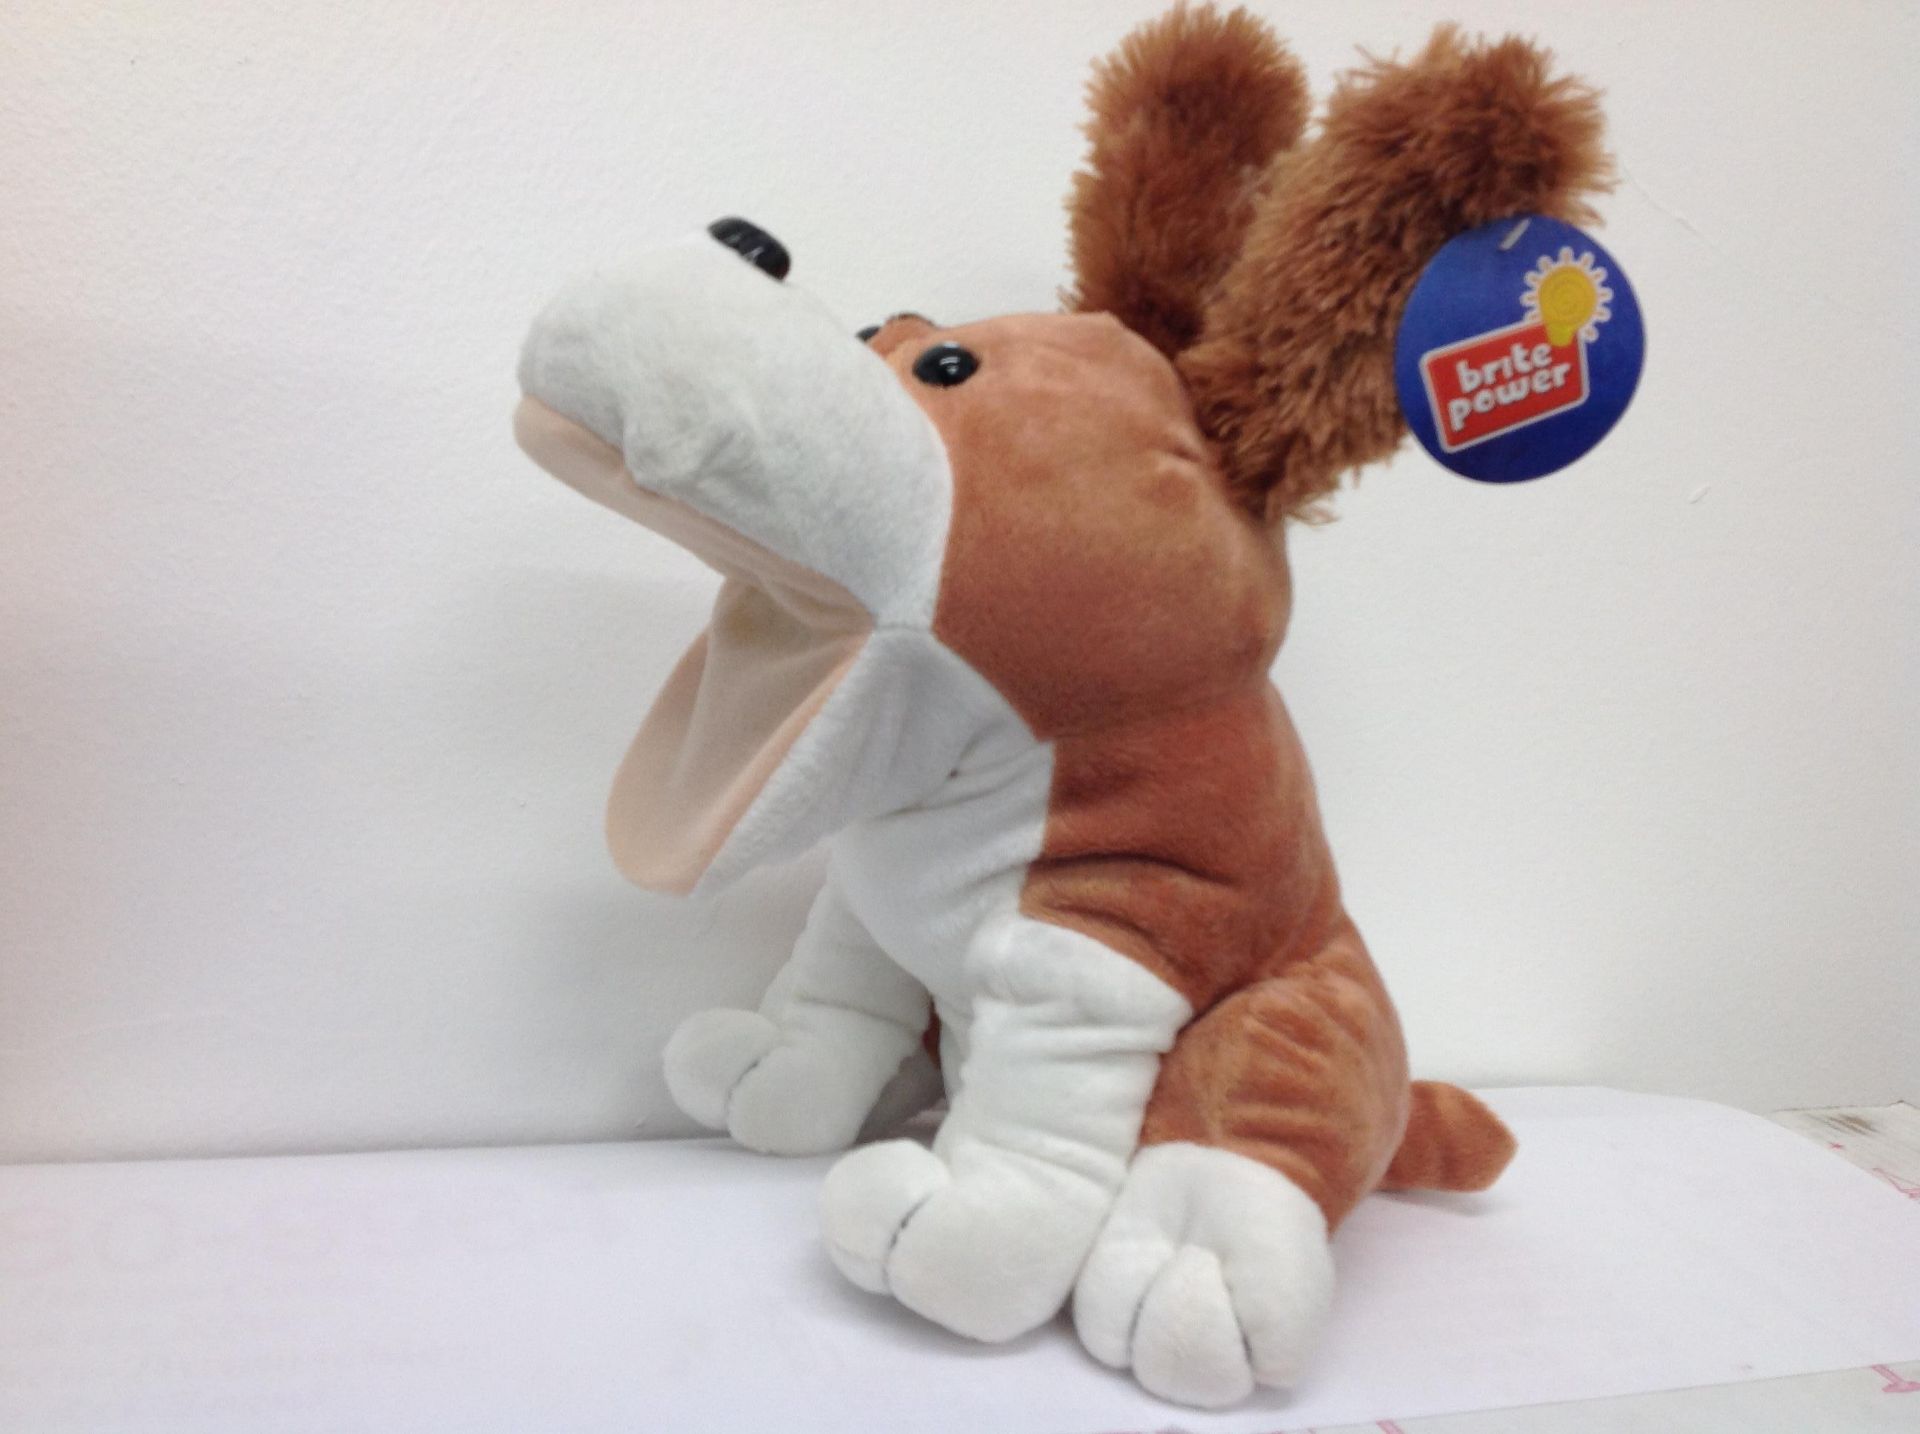 20 x Brite Power Talking Large Dog Hand Puppet. Brand new stock. RRP £19.99 each, total original RRP - Image 4 of 4